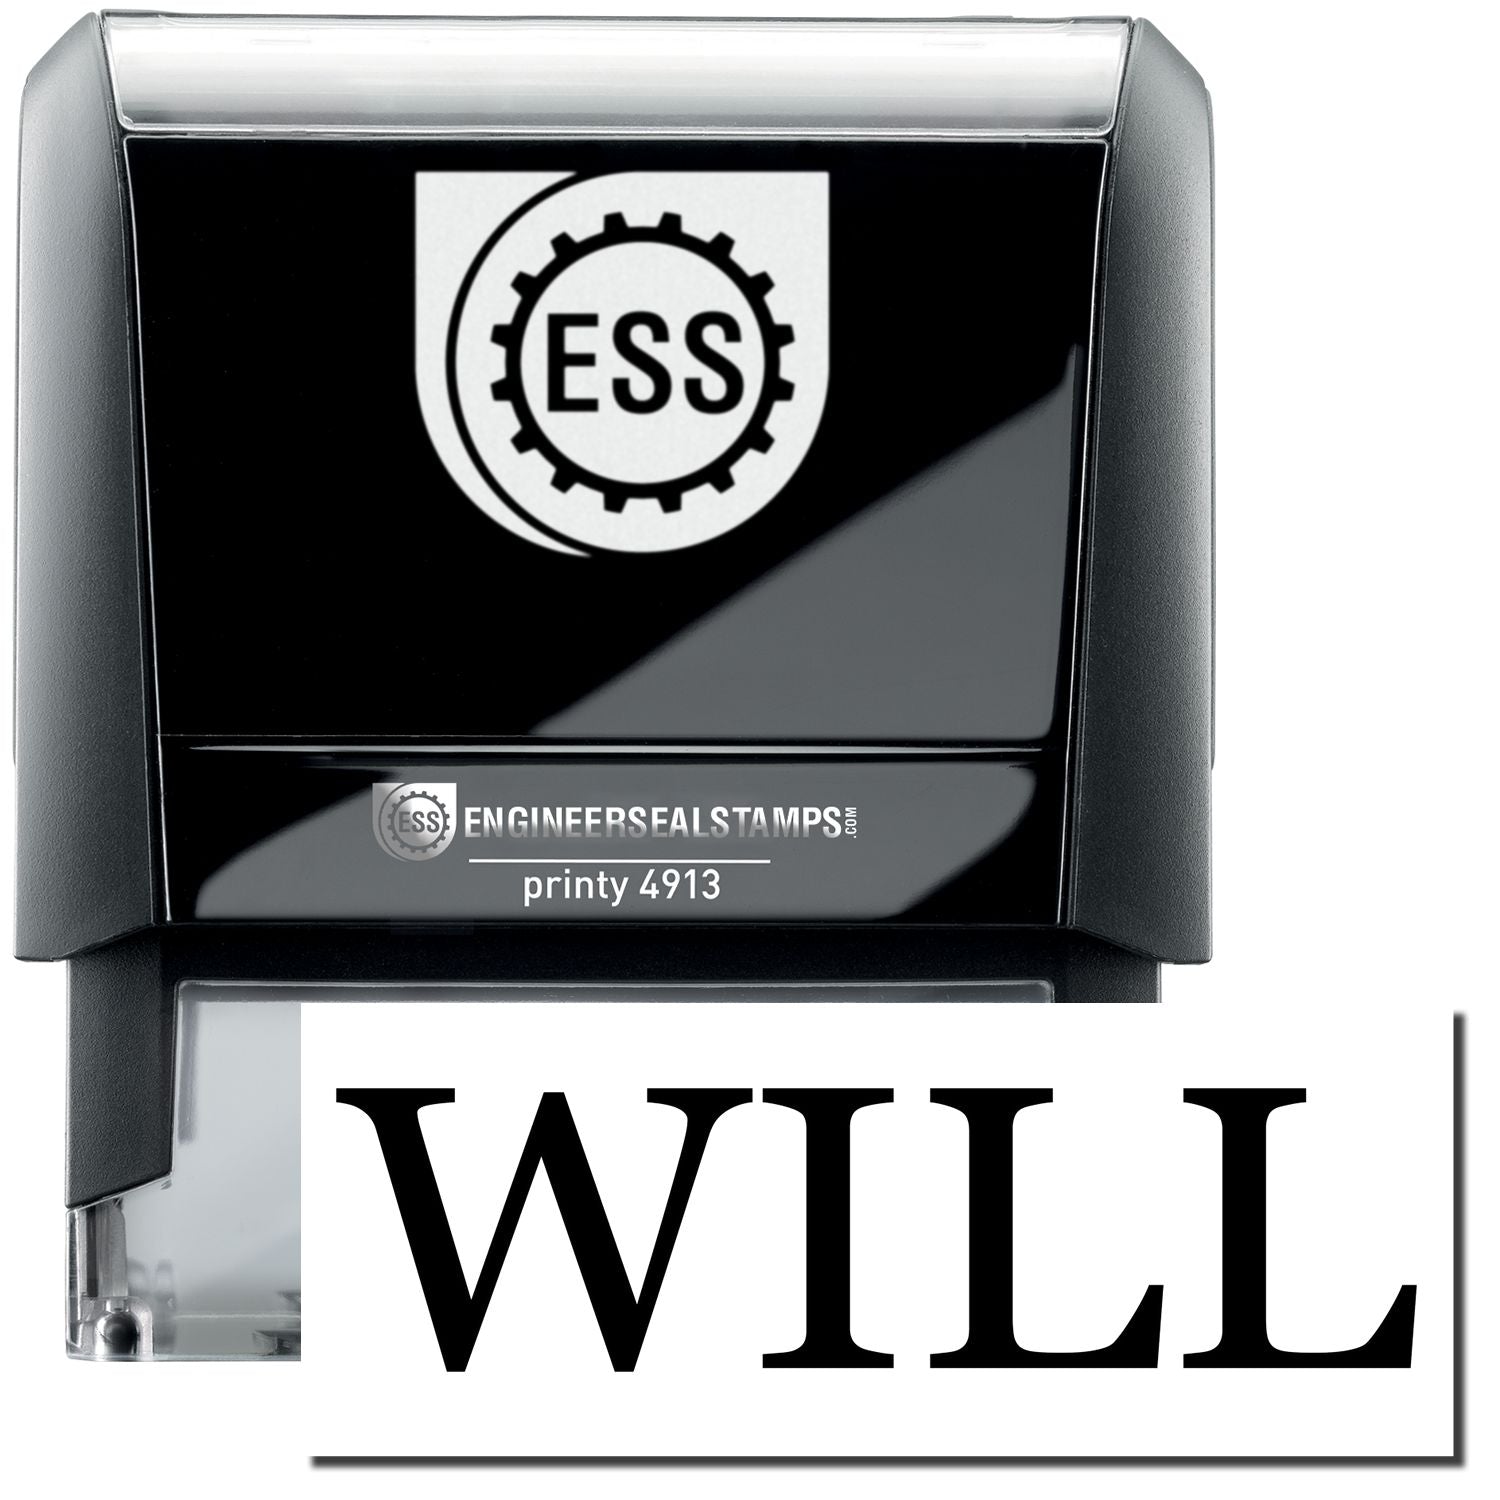 A self-inking stamp with a stamped image showing how the text "WILL" in a large bold font is displayed by it.